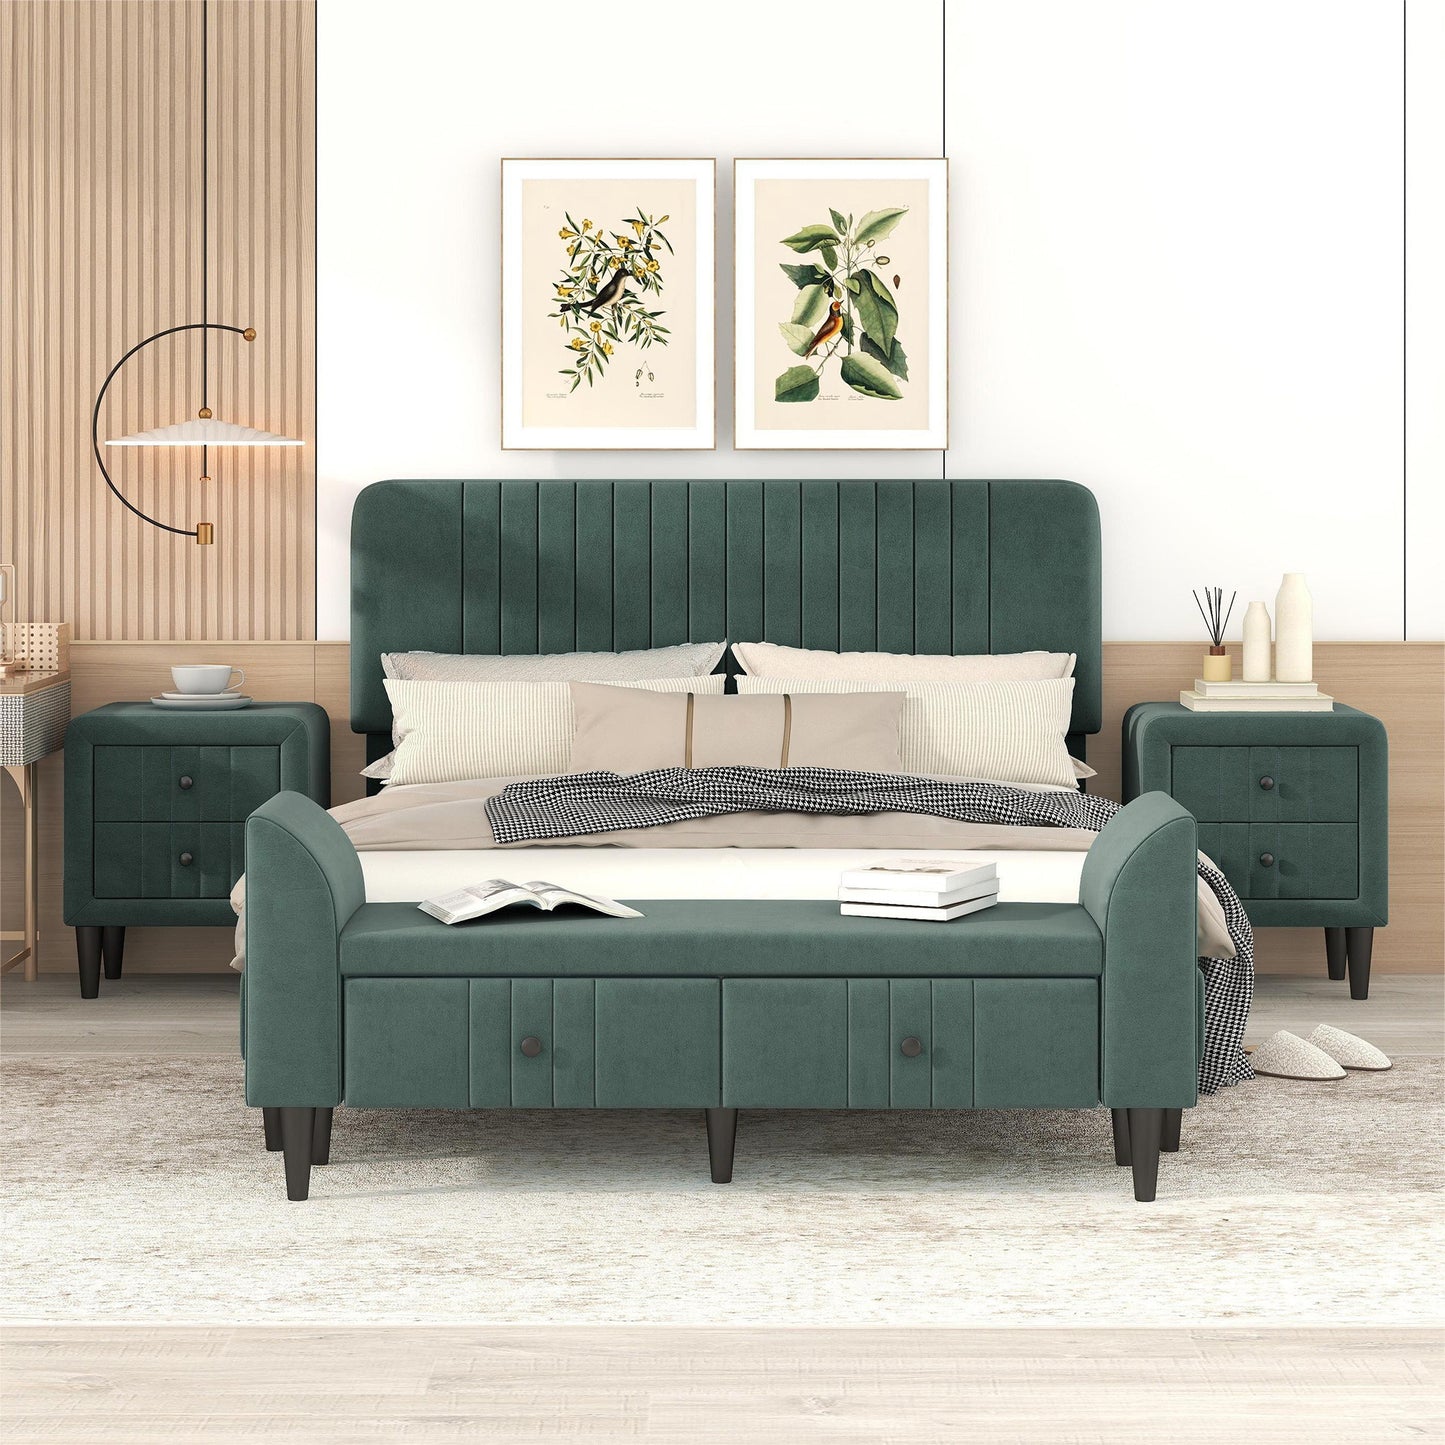 4-pieces upholstered bedroom sets with two nightstands and storage bench-green